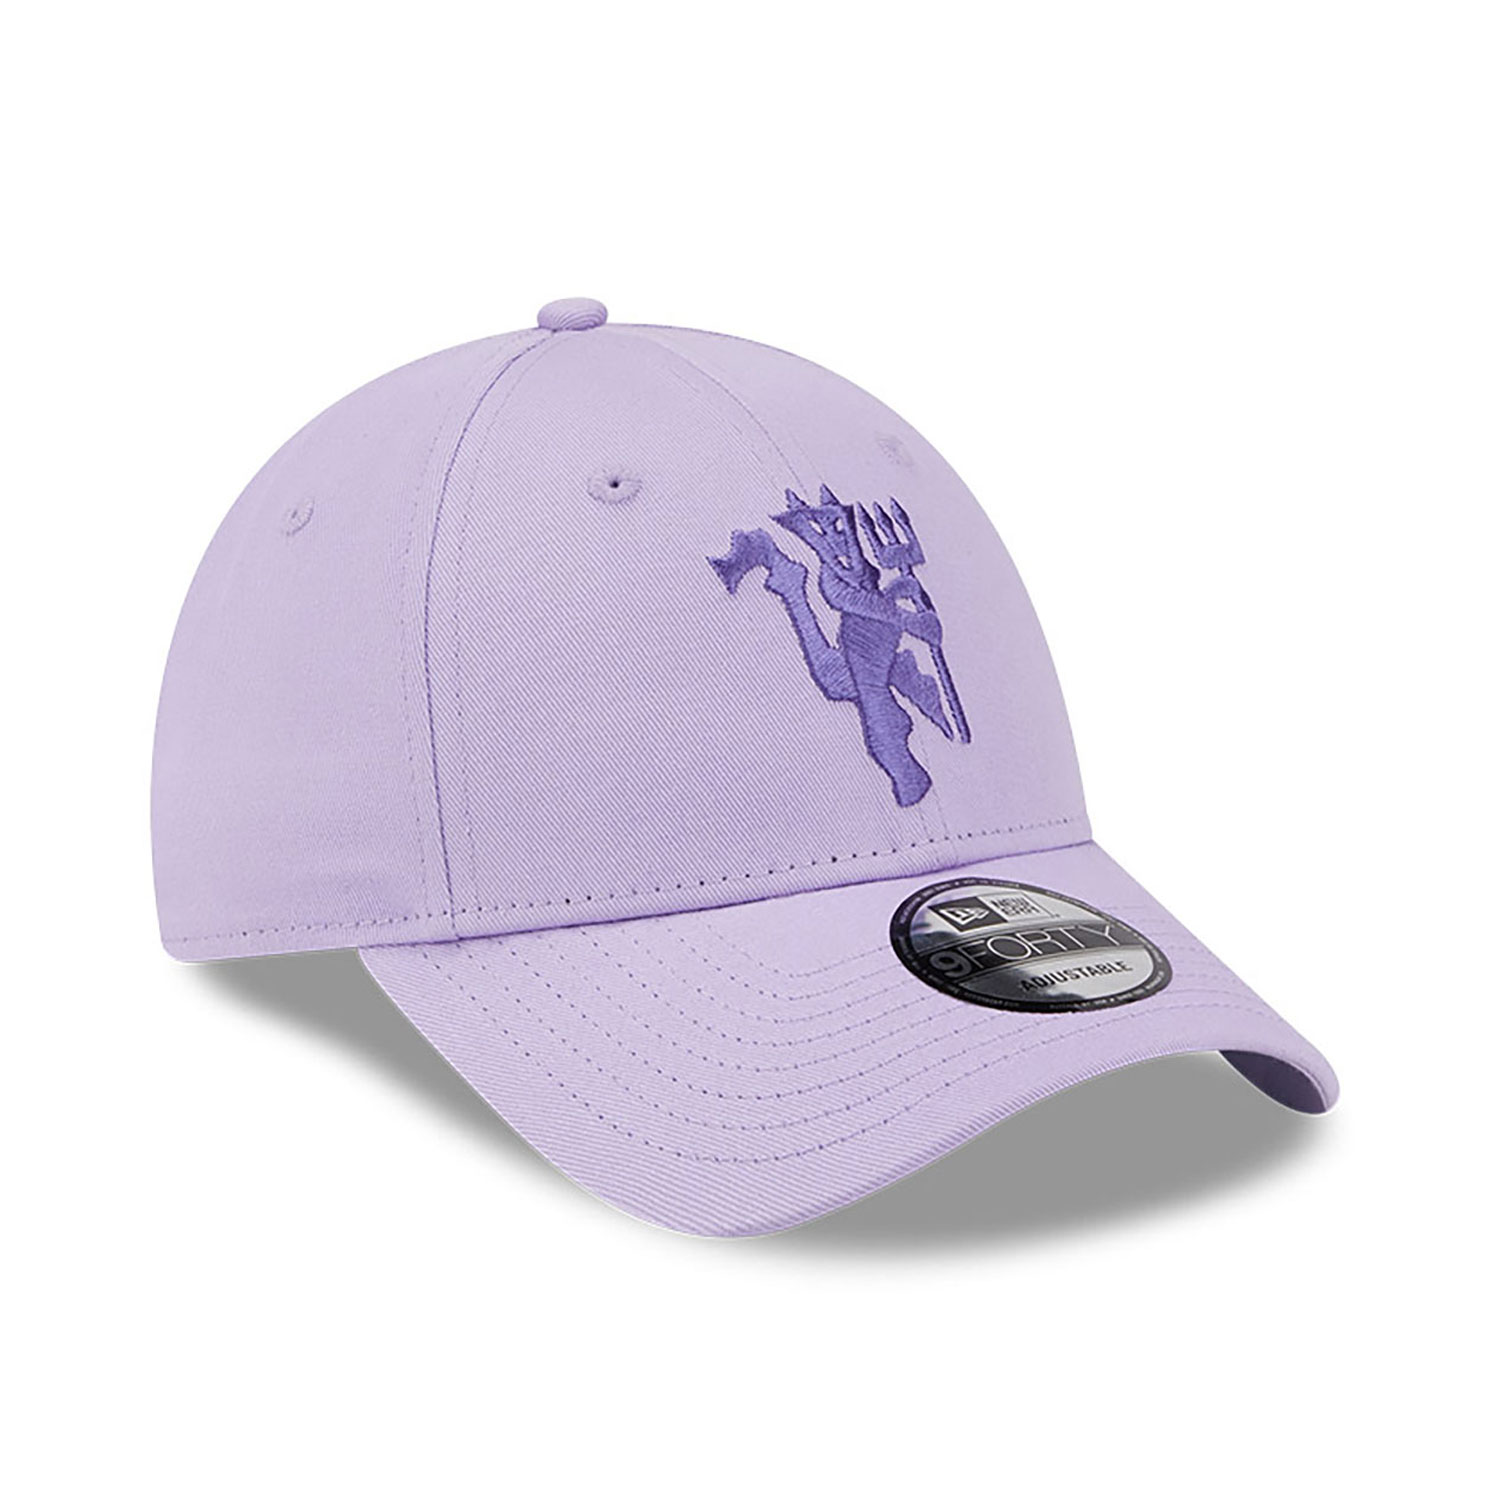 Manchester United FC Womens Purple 9FORTY Adjustable Cap